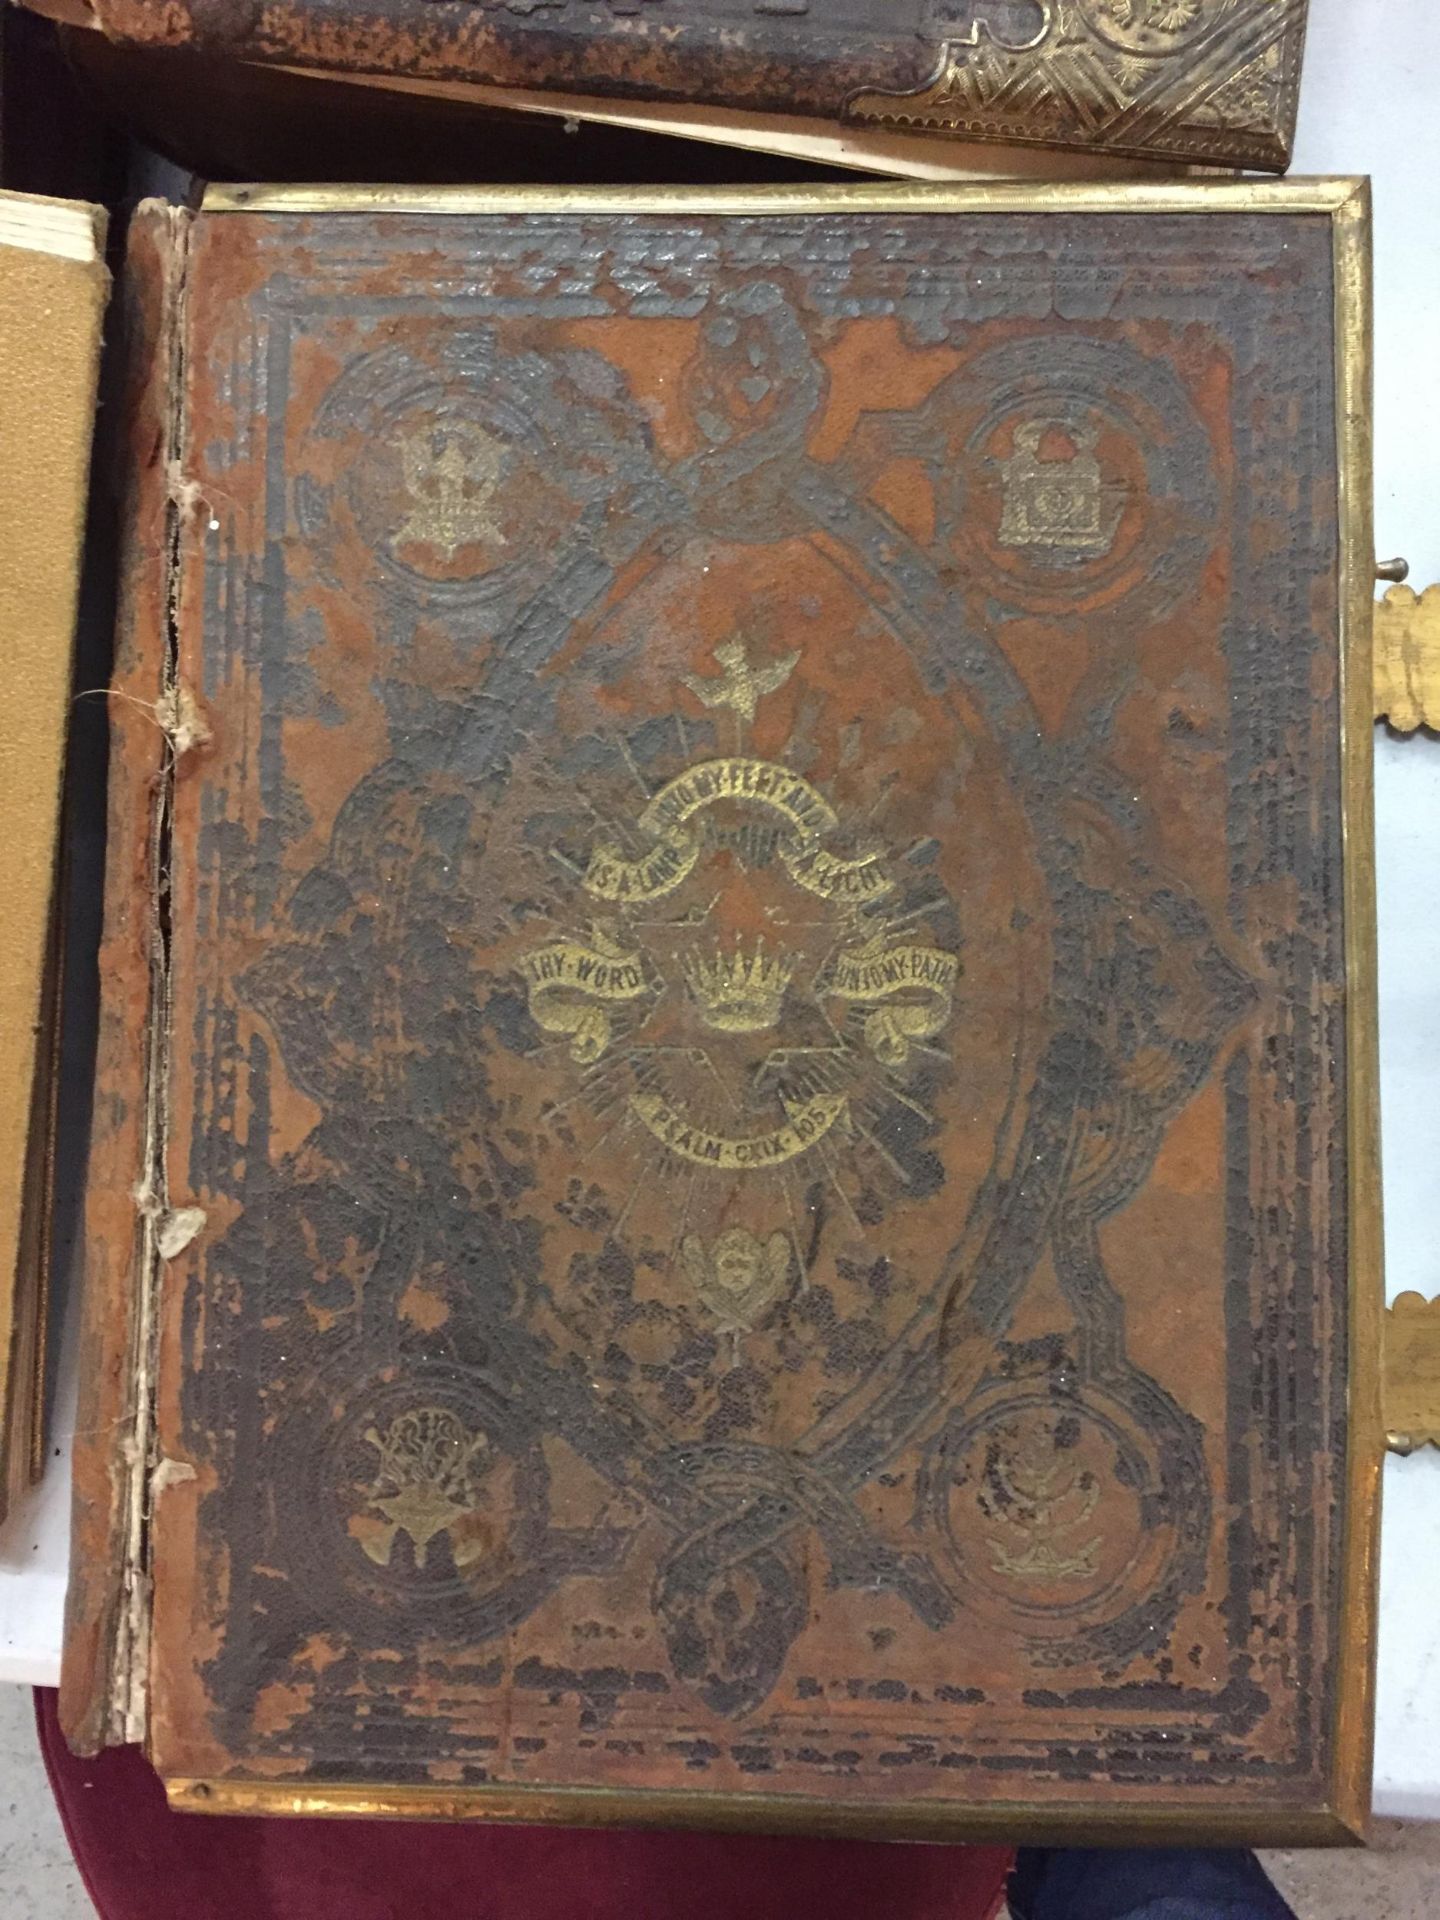 A COLLECTION OF FIVE BOOKS TO INCLUDE TWO LARGE BRASS BOUND OLD LEATHER BIBLES, VOLUMES 1 & 2 OF - Image 2 of 5